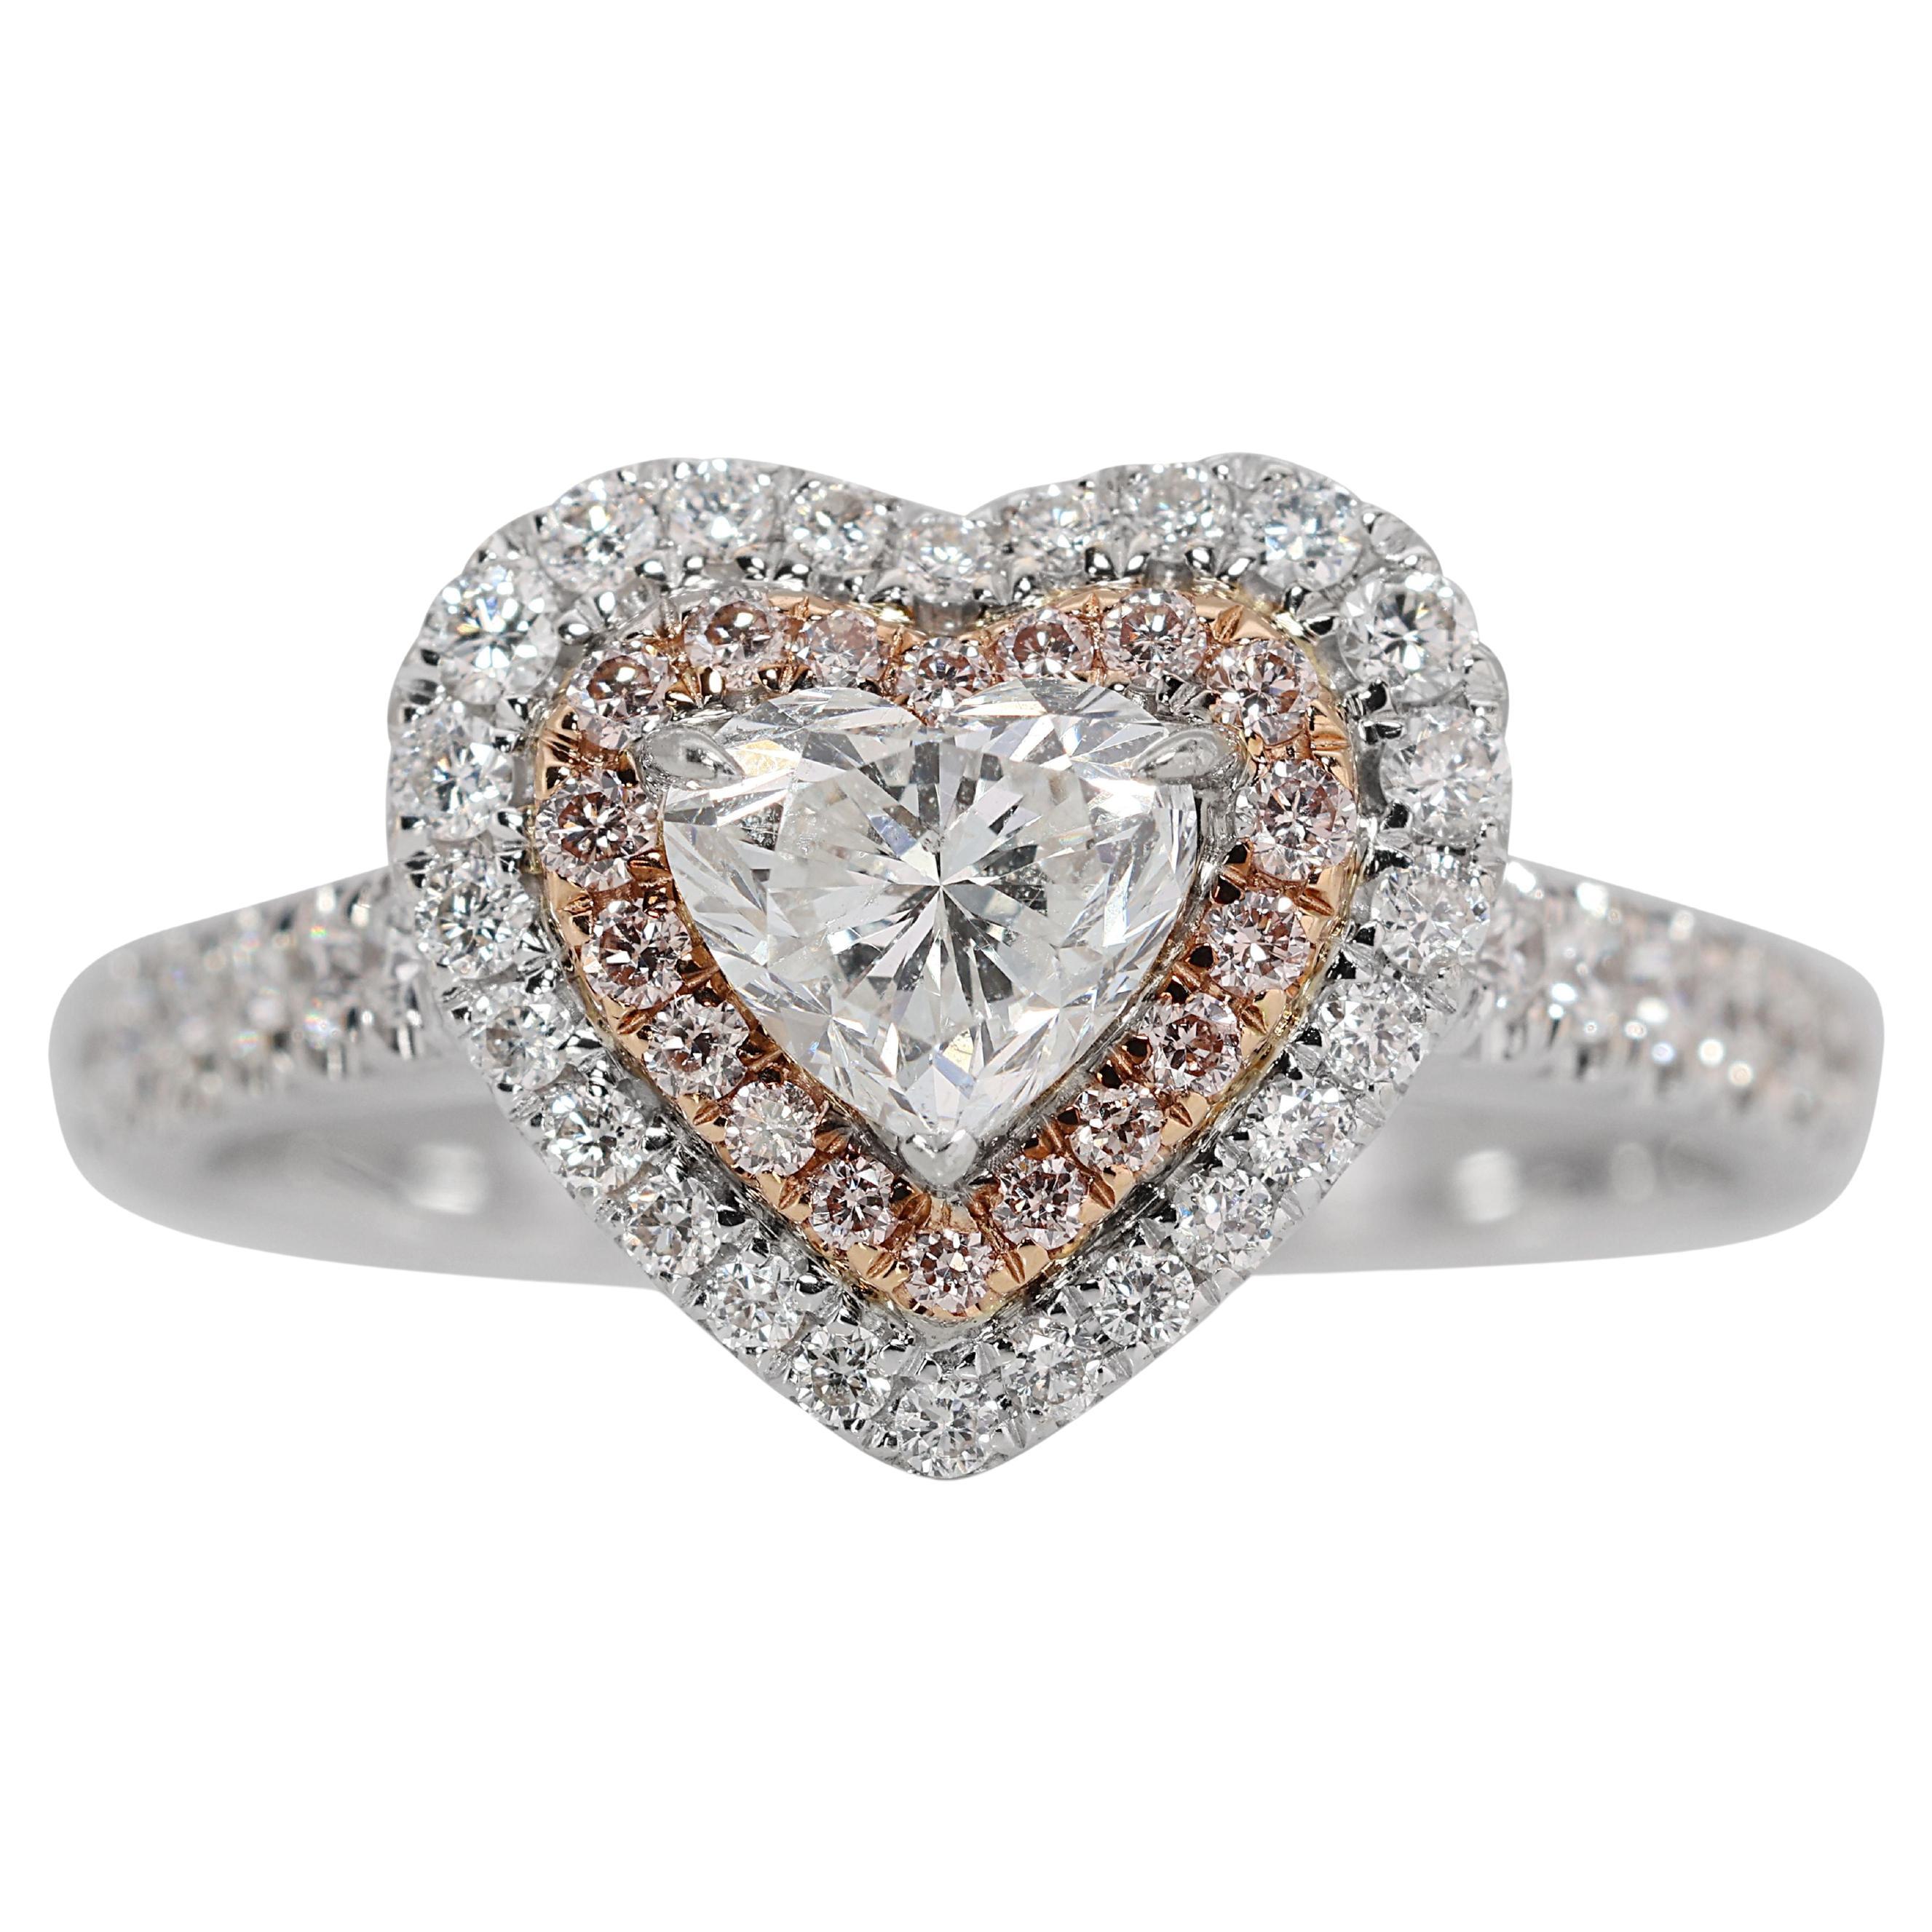 Beautiful 1.19ct Heart-shaped Diamond Ring in 18K White Gold For Sale